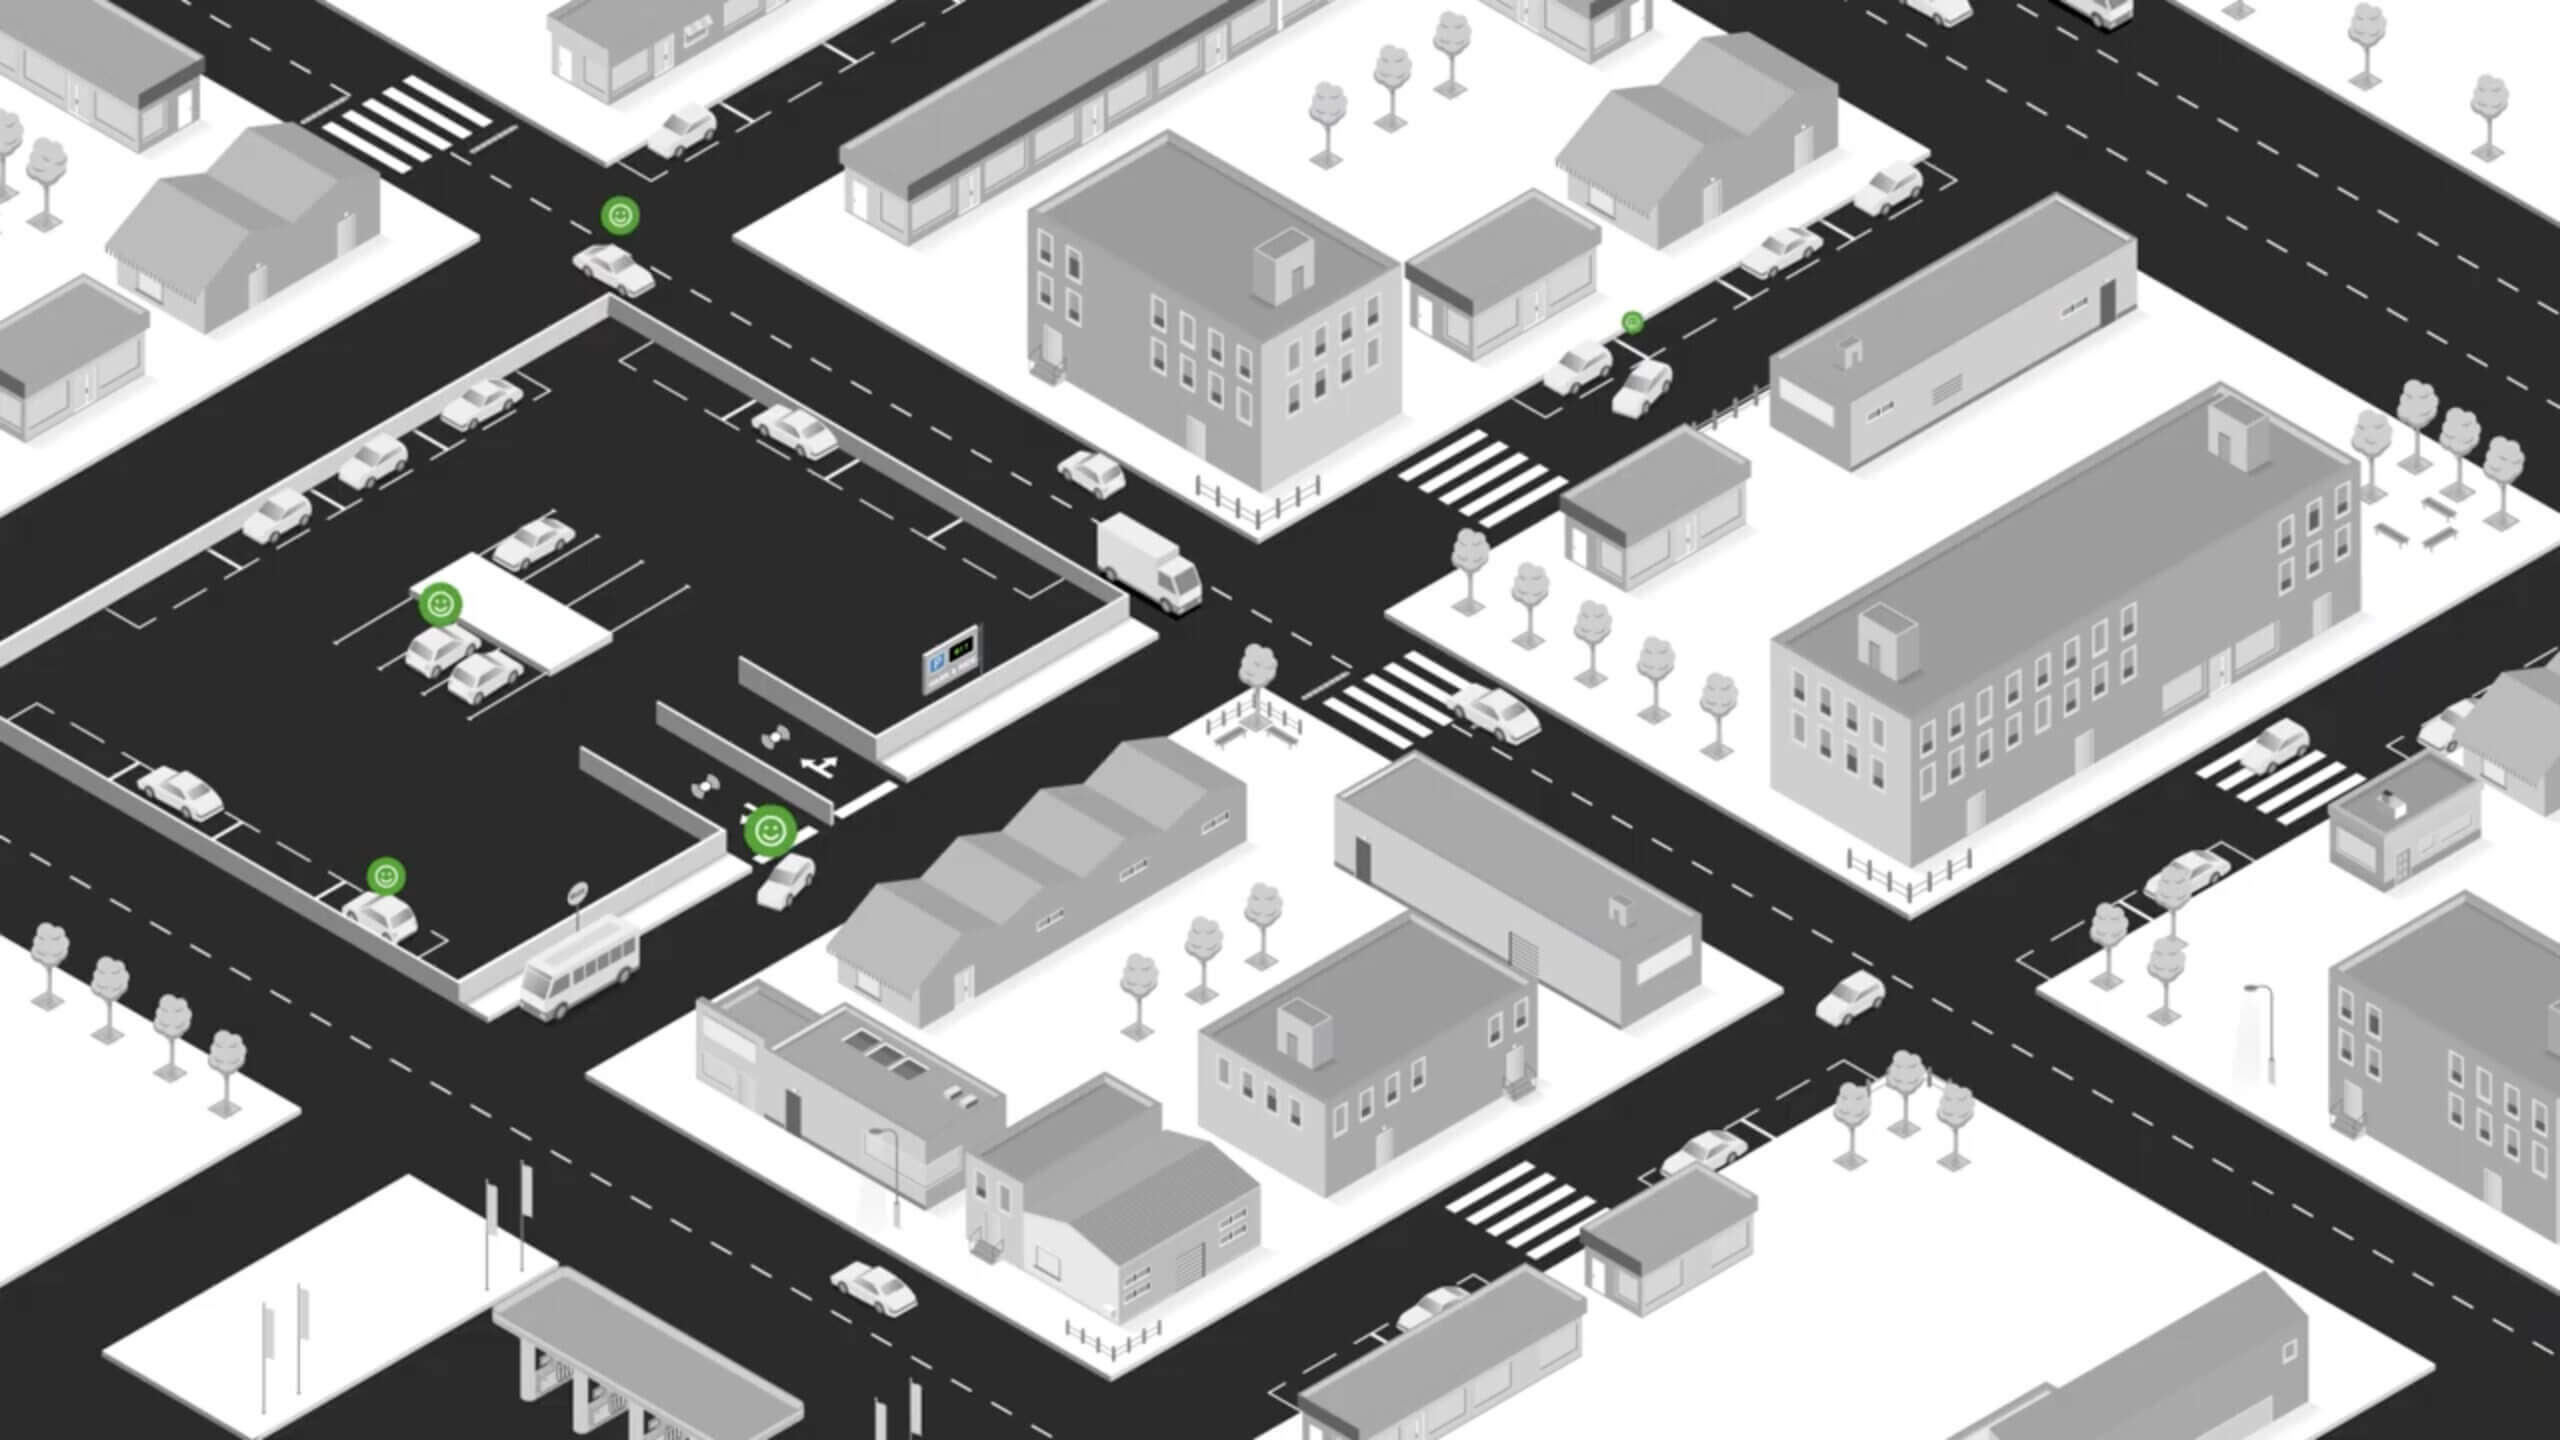 On-Street parking guidance Solution